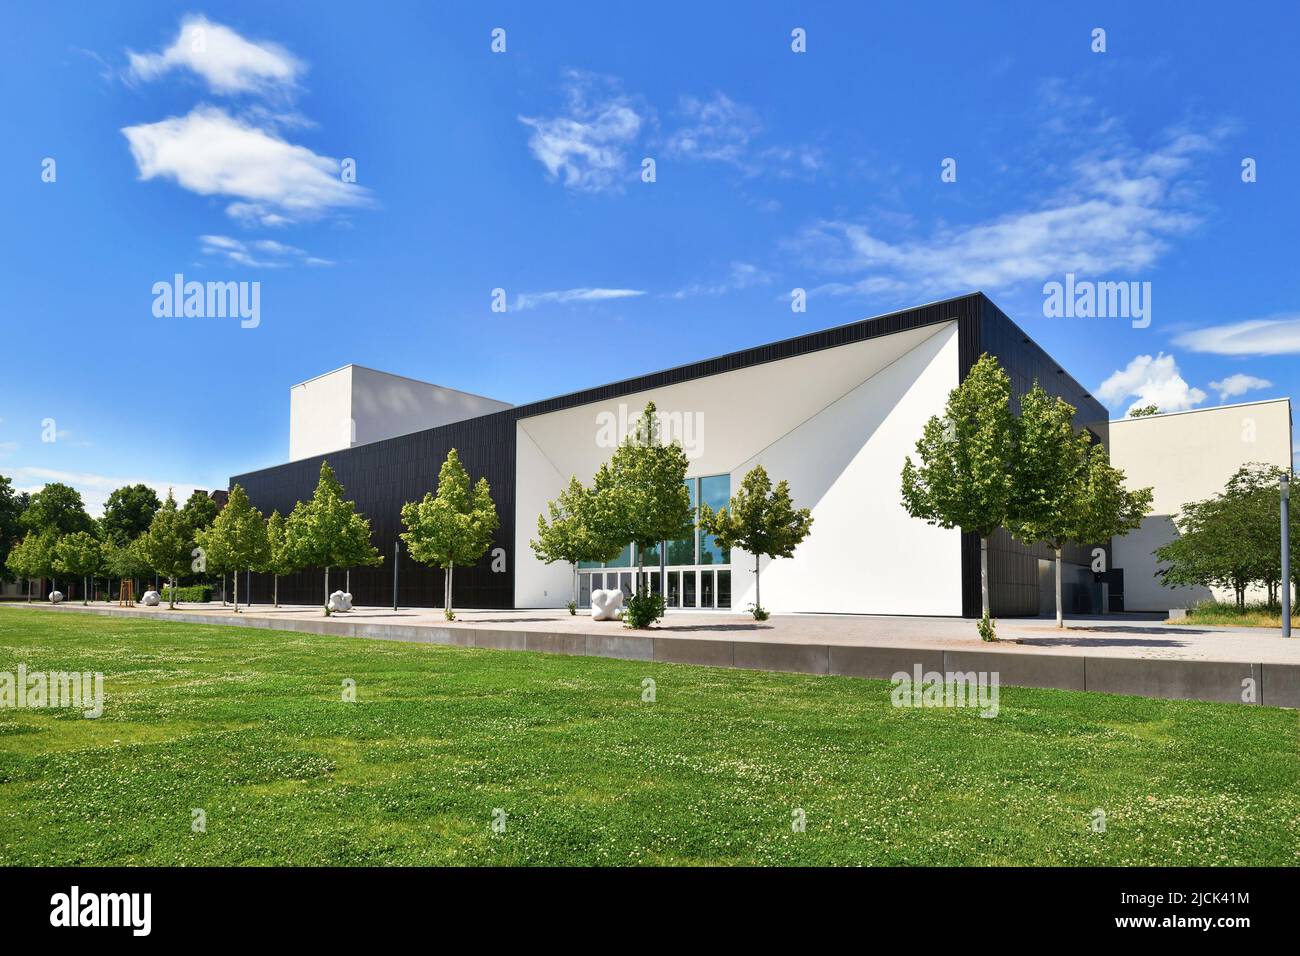 Multimedia, concert and theater complex of Karlsruhe University of Music called 'Wolfgang-Rihm-Forum', Germany Stock Photo